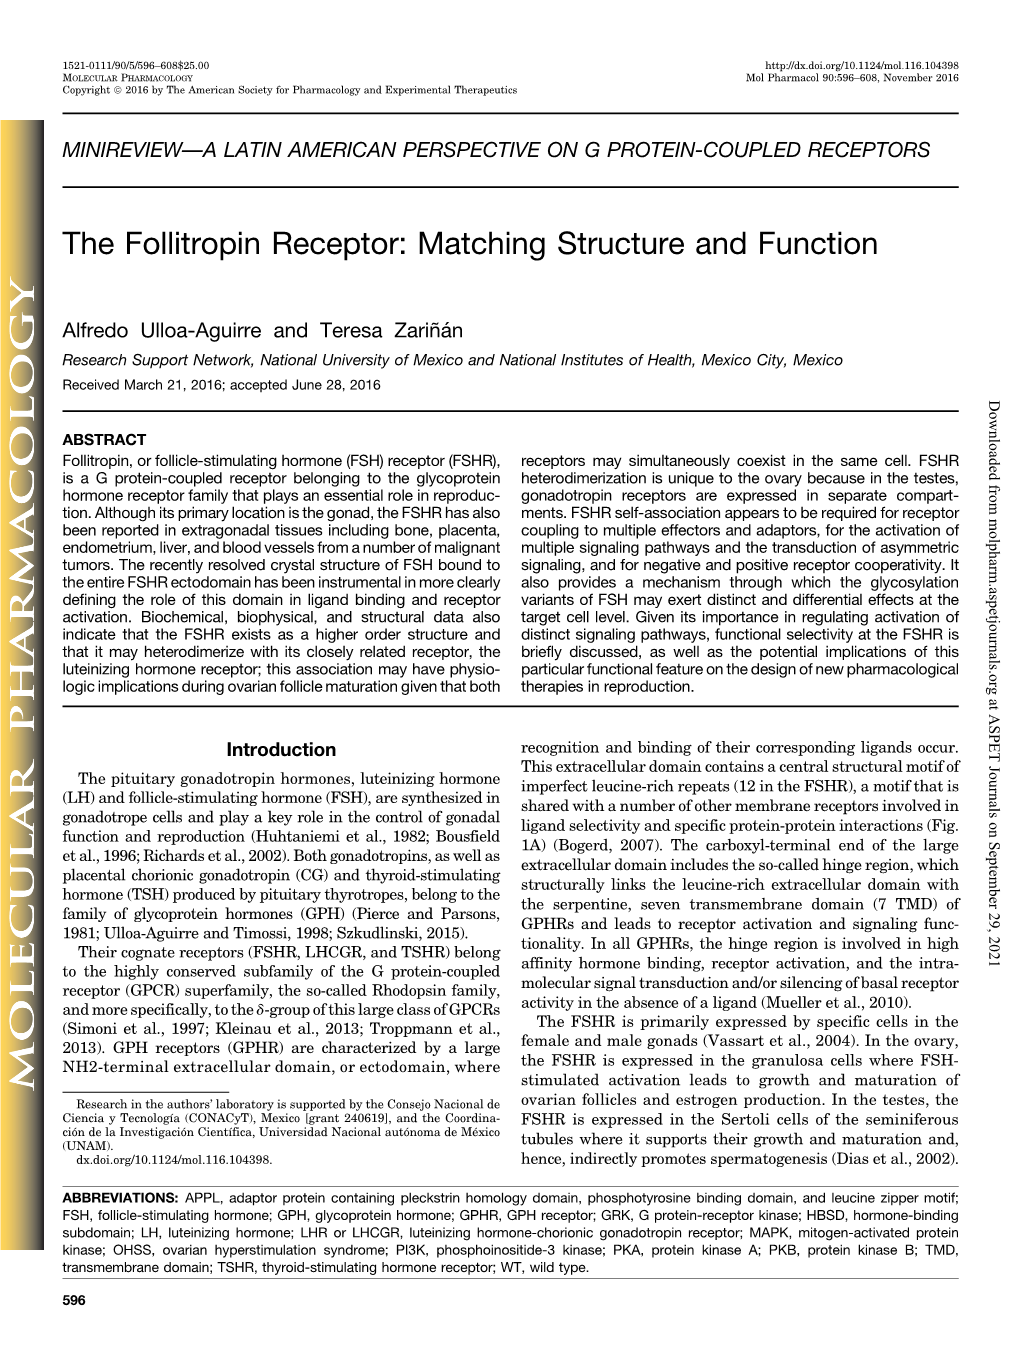 The Follitropin Receptor: Matching Structure and Function